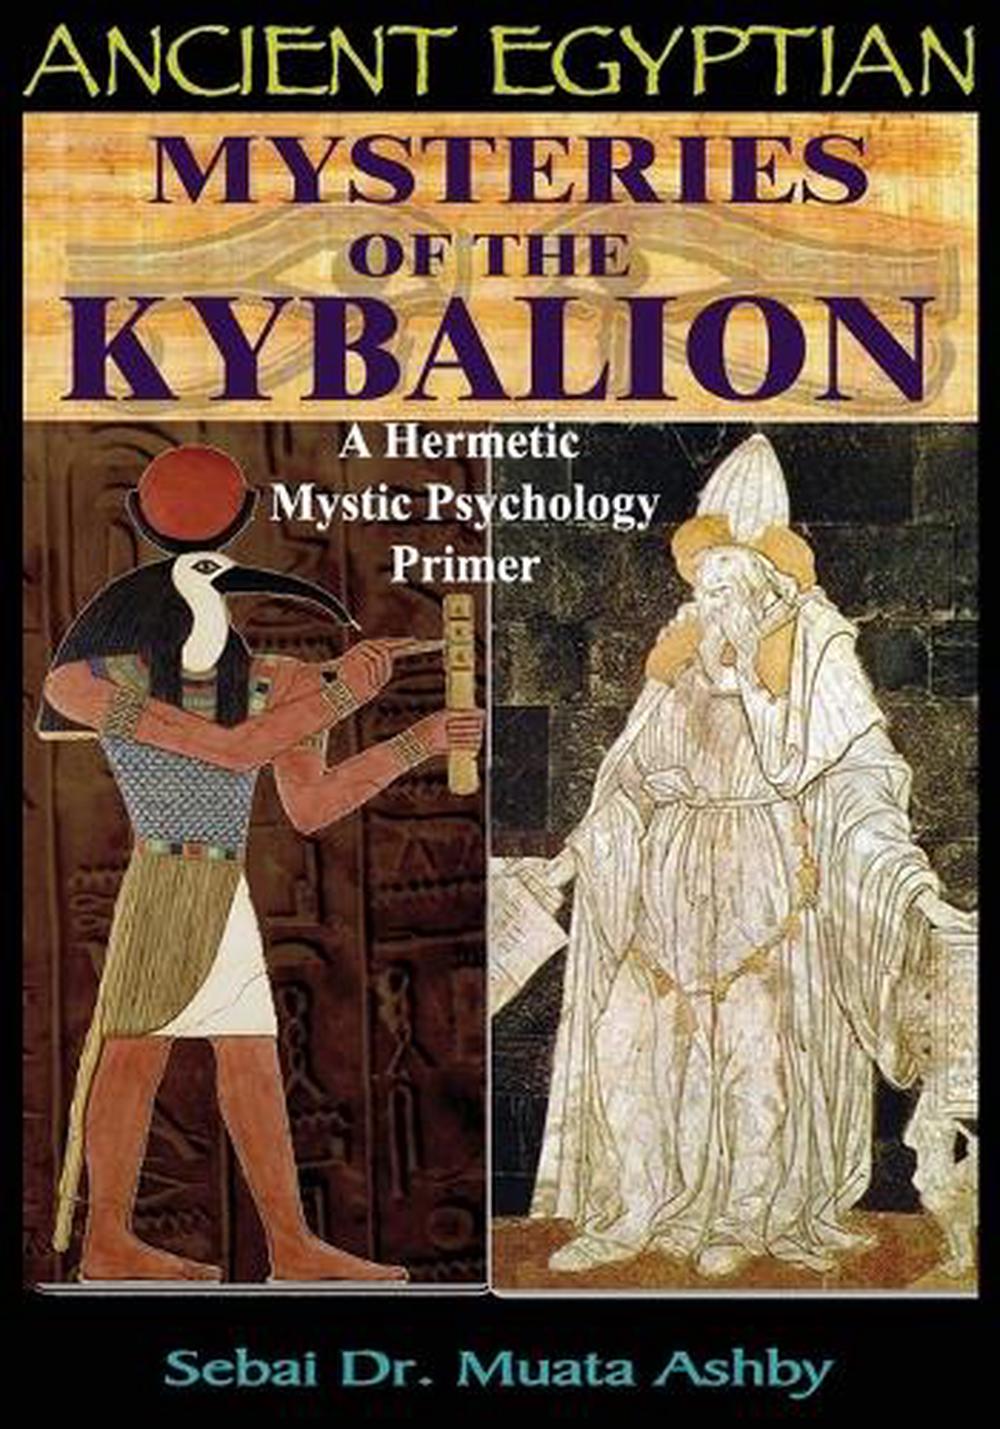 Ancient Egyptian Mysteries Of The Kybalion A Hermetic Mystic Psychology Primer 9781884564864 Ebay